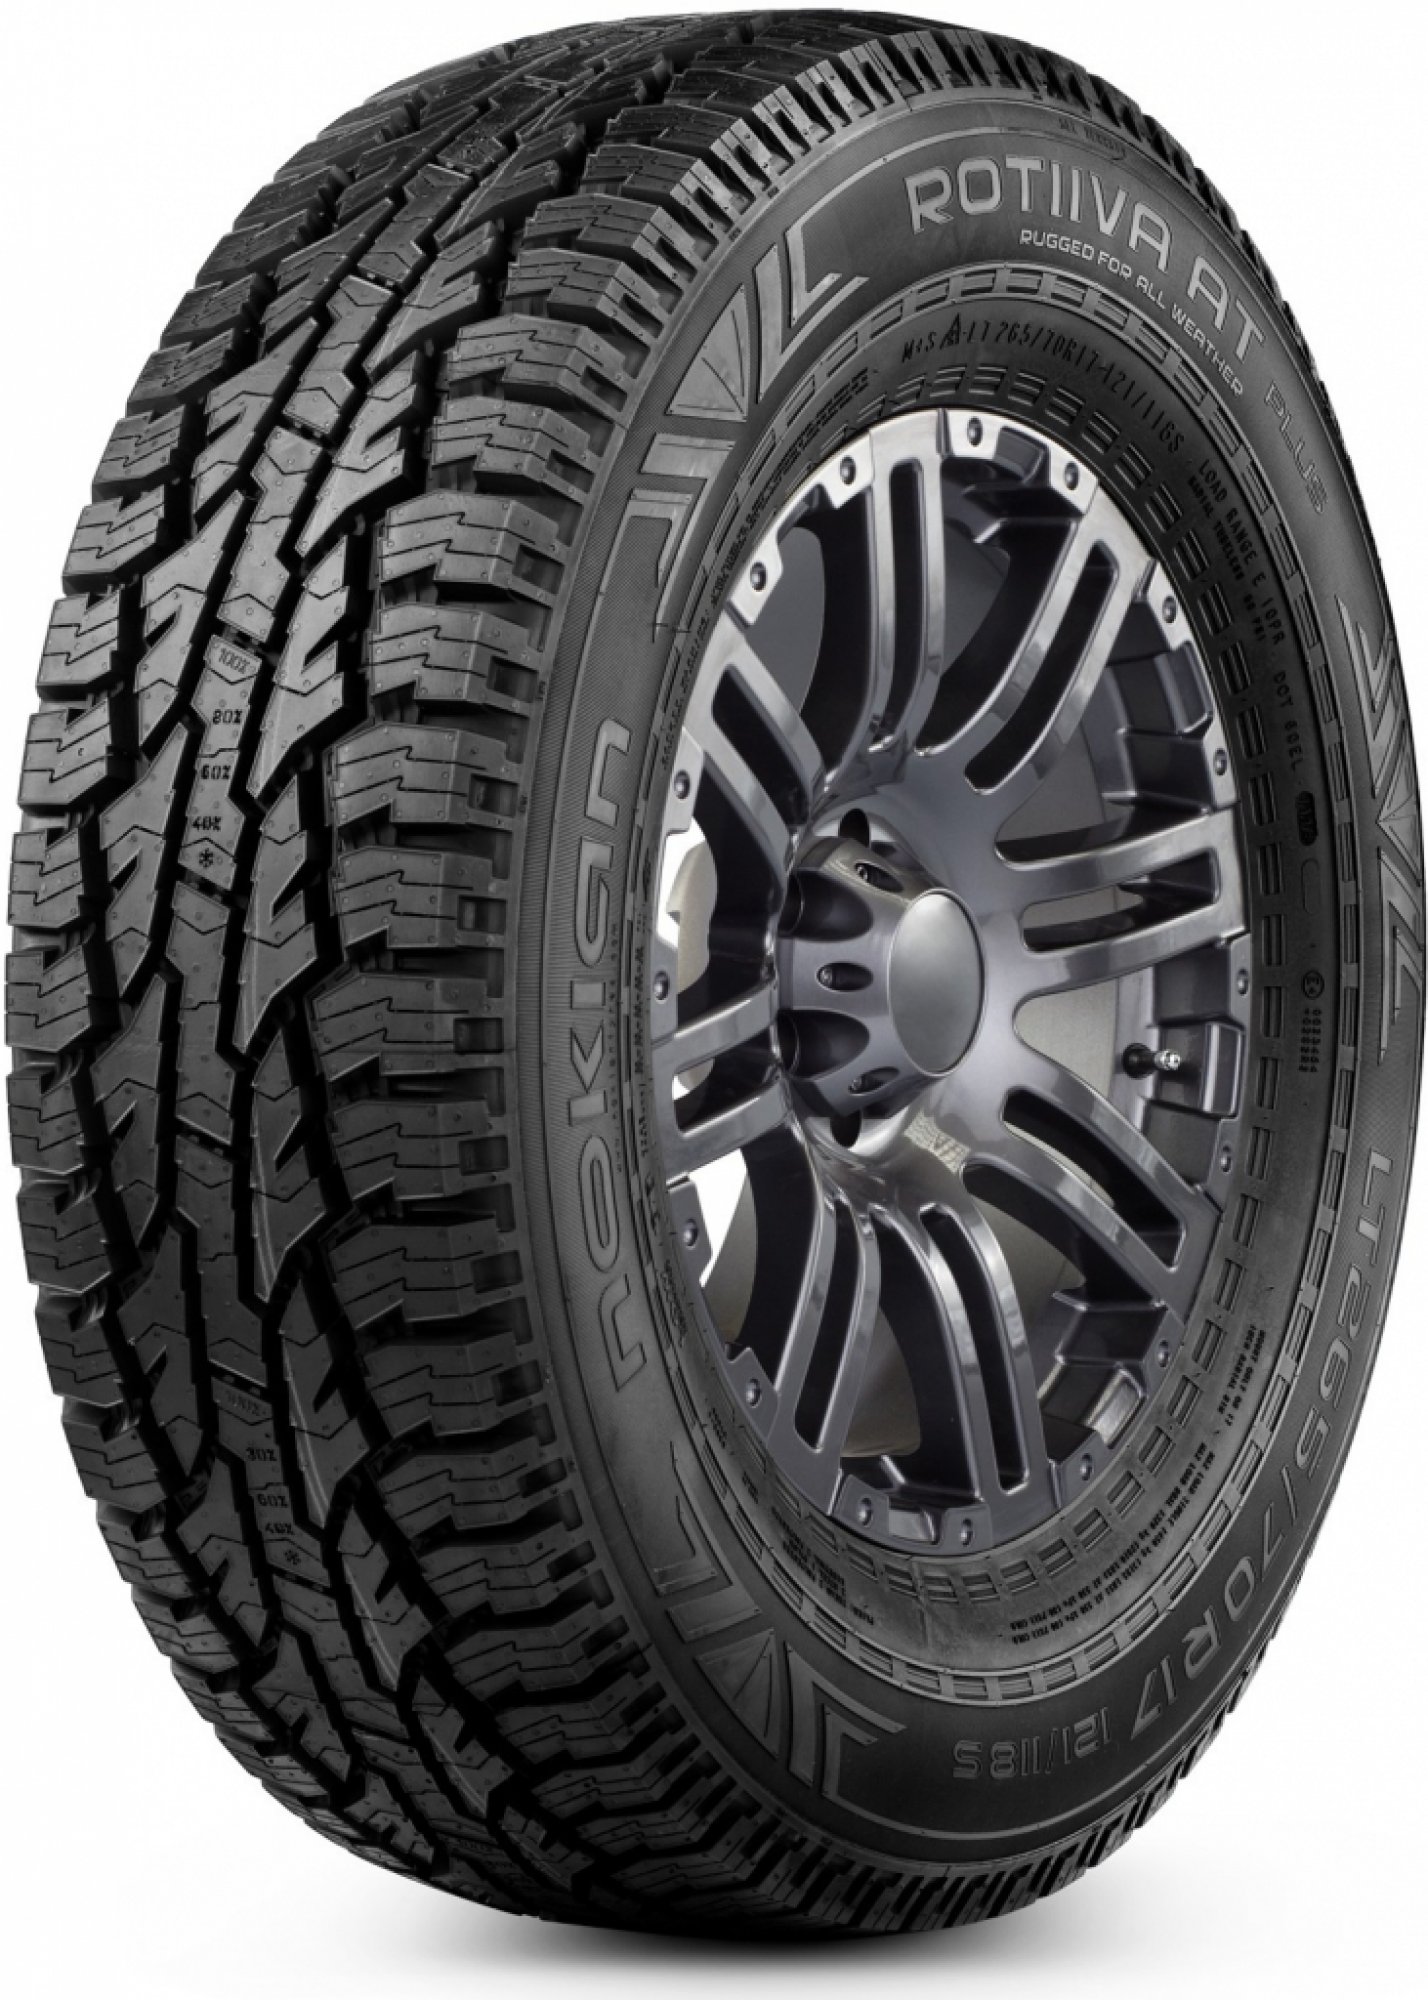 NOKIAN TYRES ROTIIVA AT PLUS 305/55 R 20 121/118S